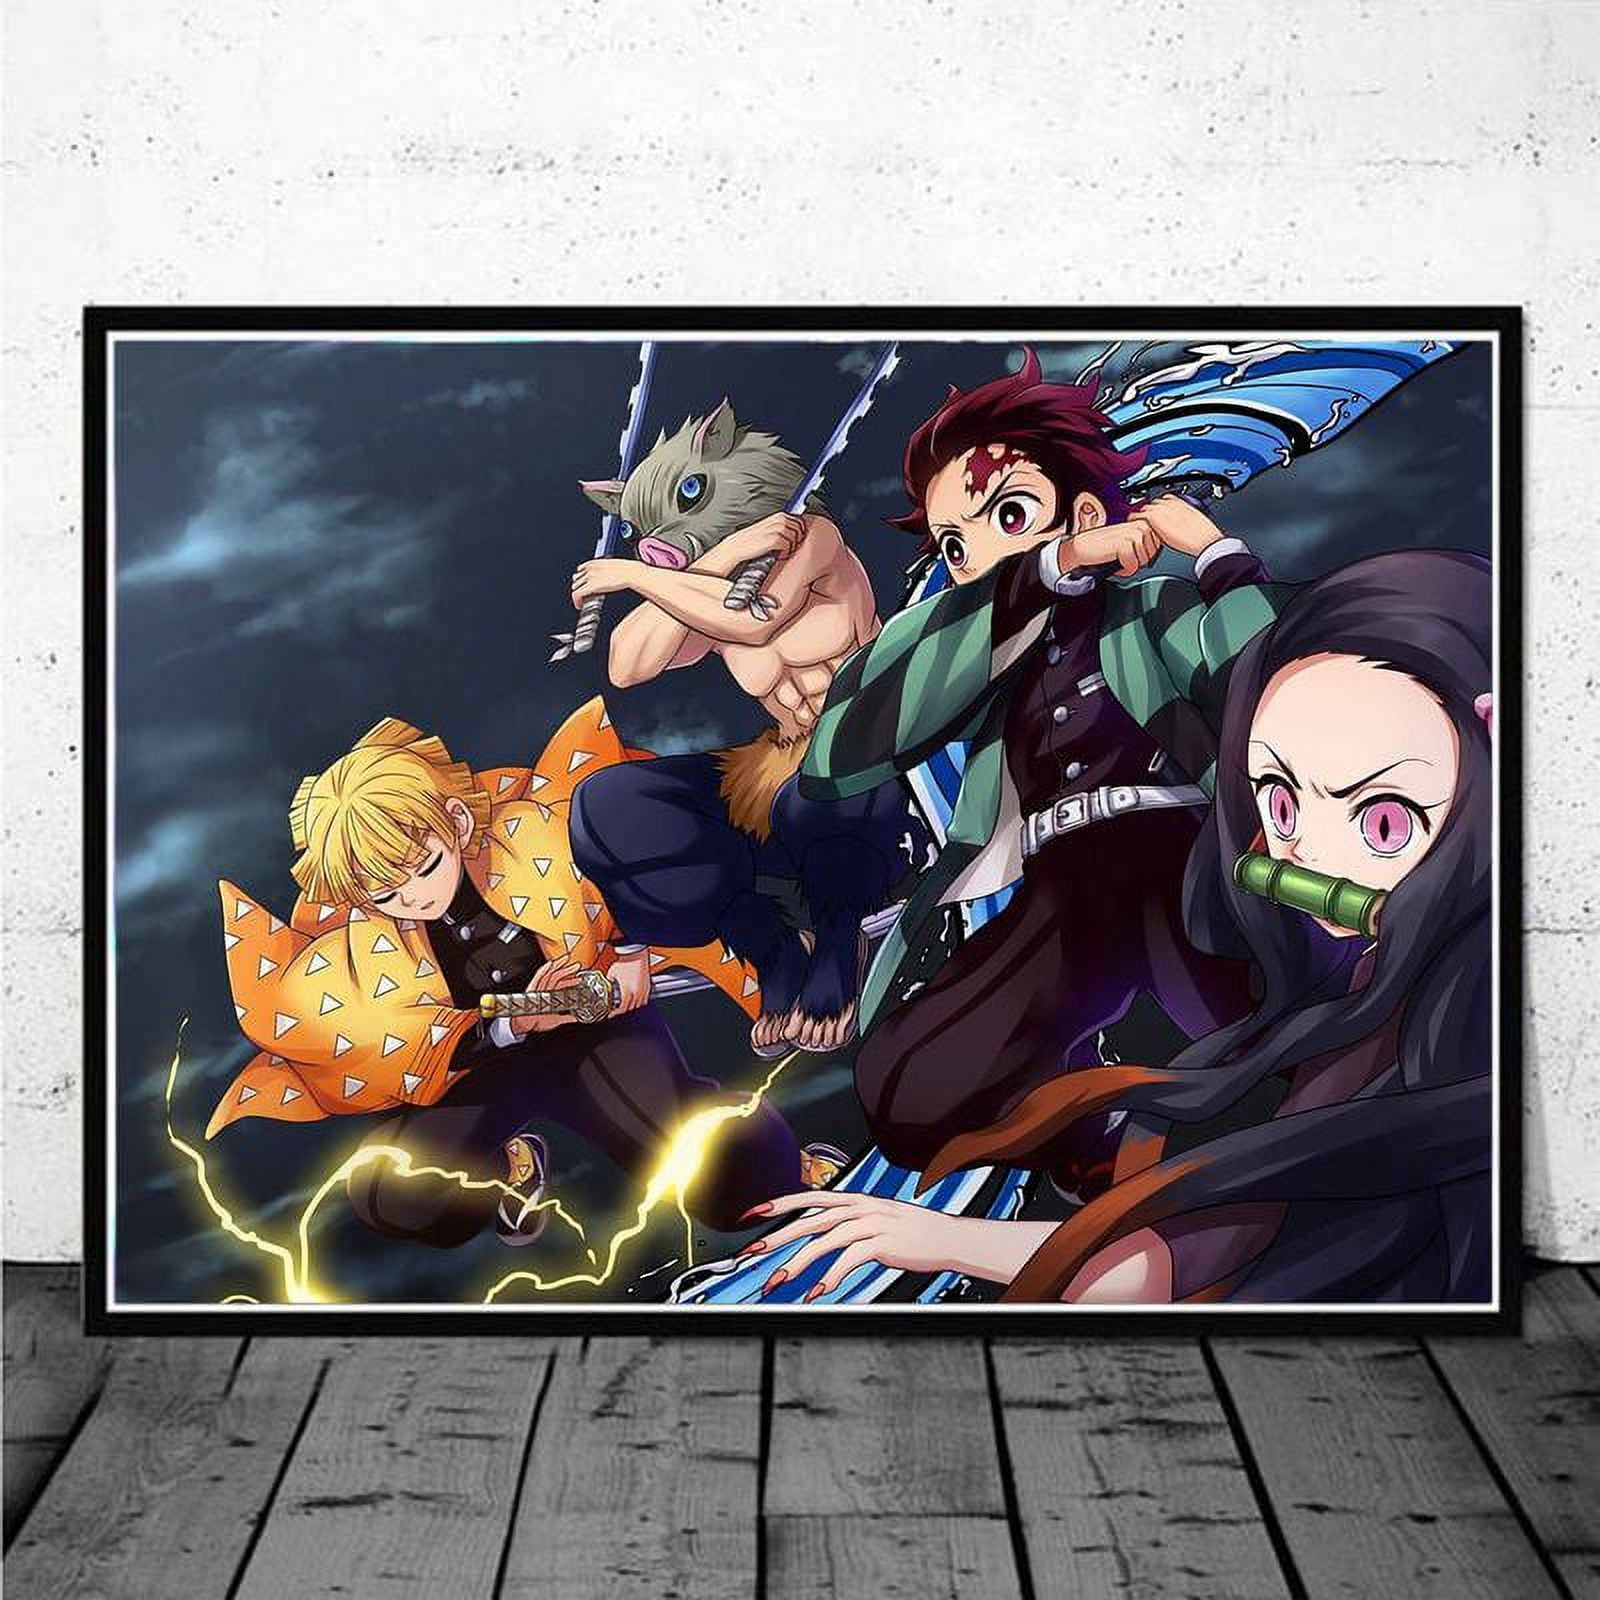 ANIME POSTER FRAME (DEMON SLAYER) - Black/White Wall Poster For Home And  Office With Frame, (12.6